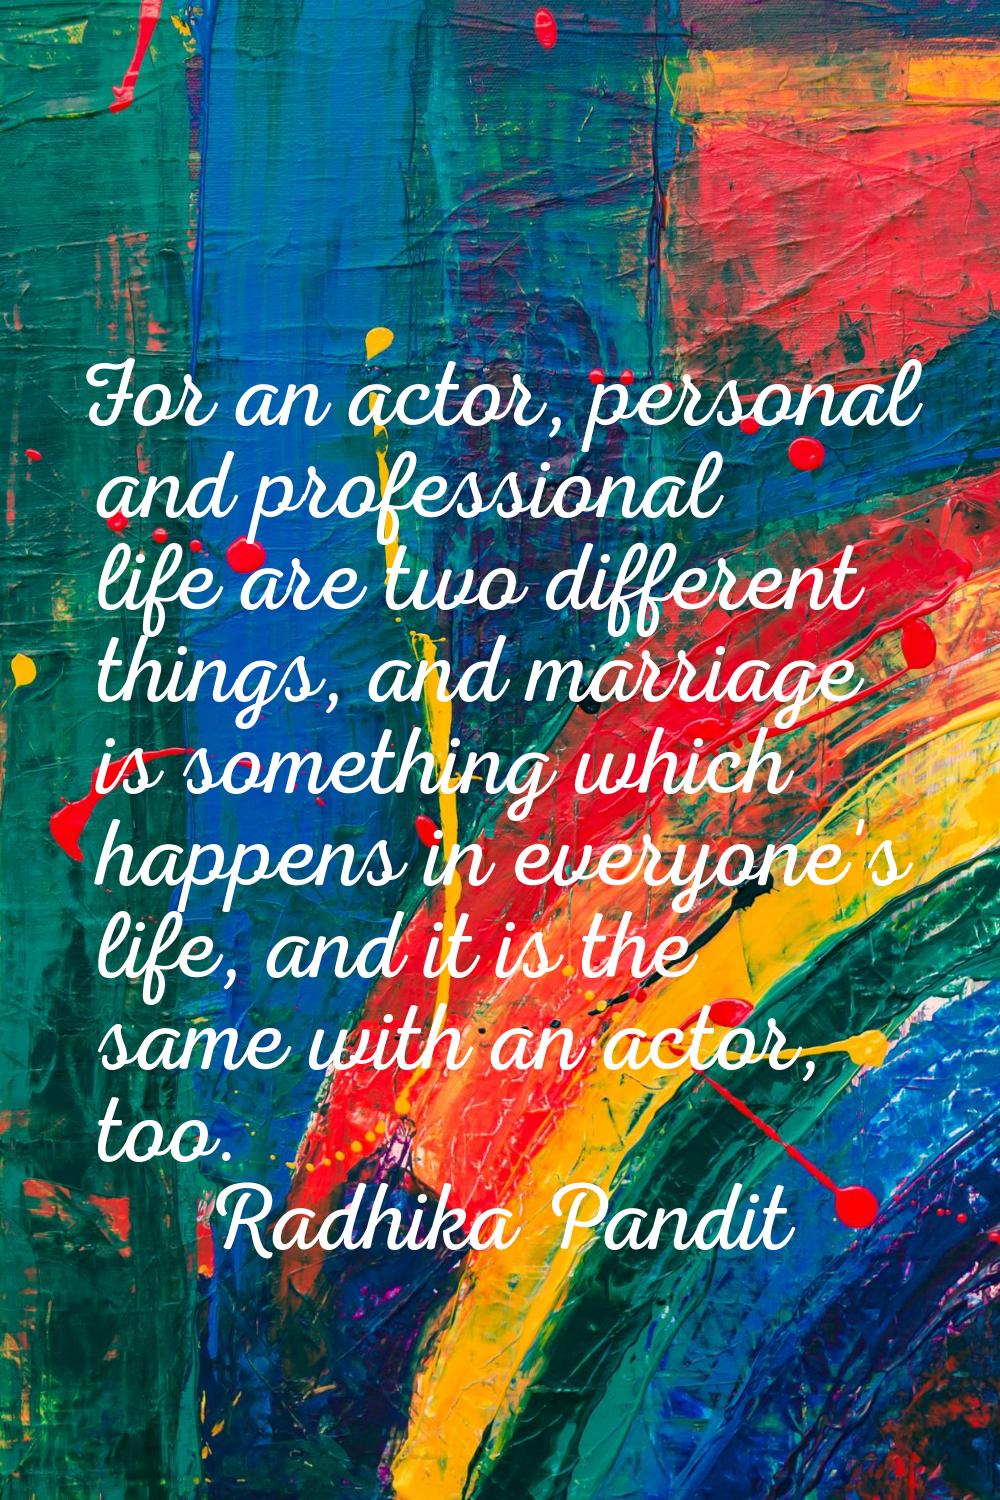 For an actor, personal and professional life are two different things, and marriage is something wh